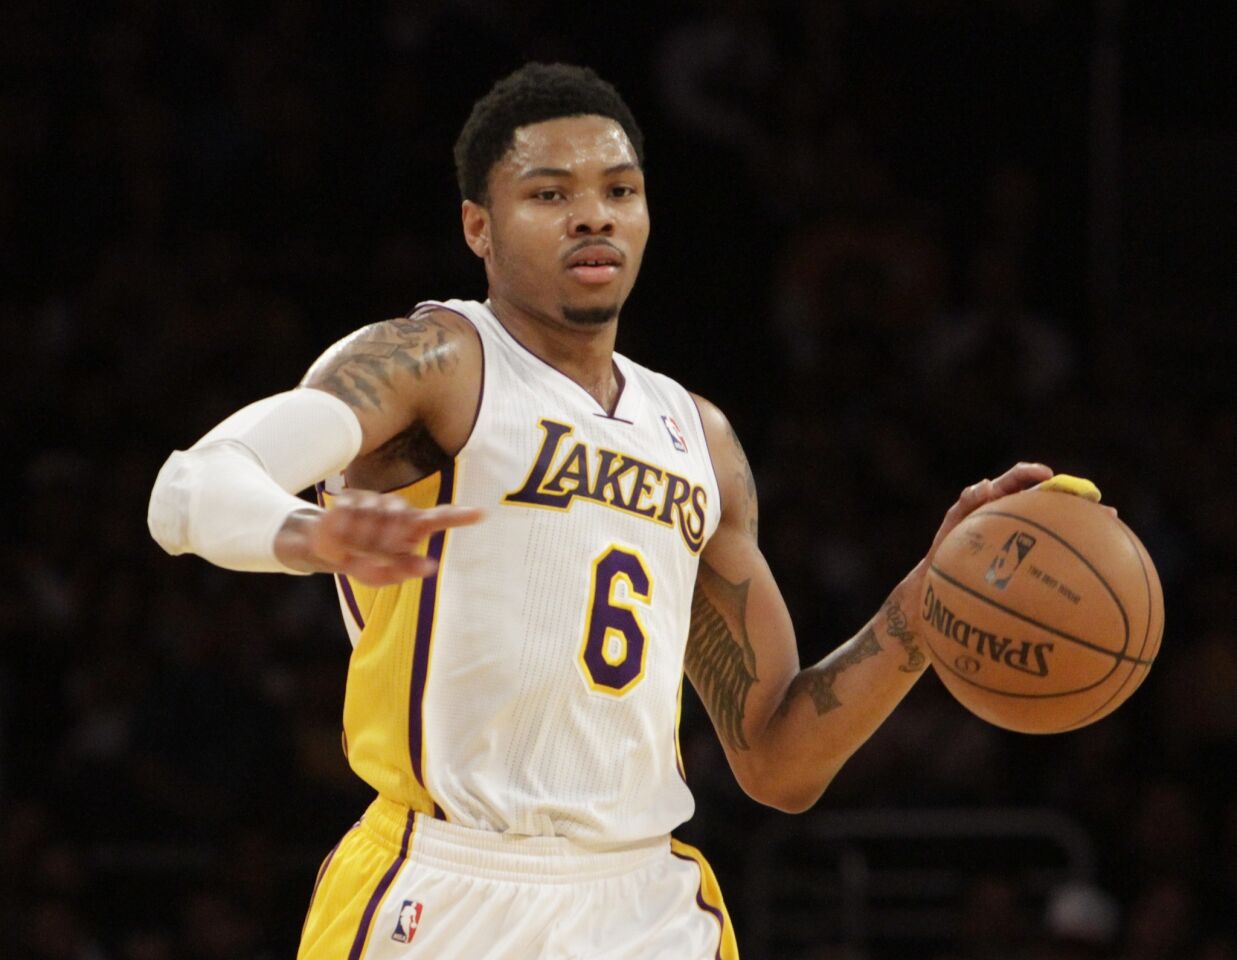 Lakers guard Kent Bazemore dribbles during the Lakers' 115-99 win over the Phoenix Suns on Sunday.